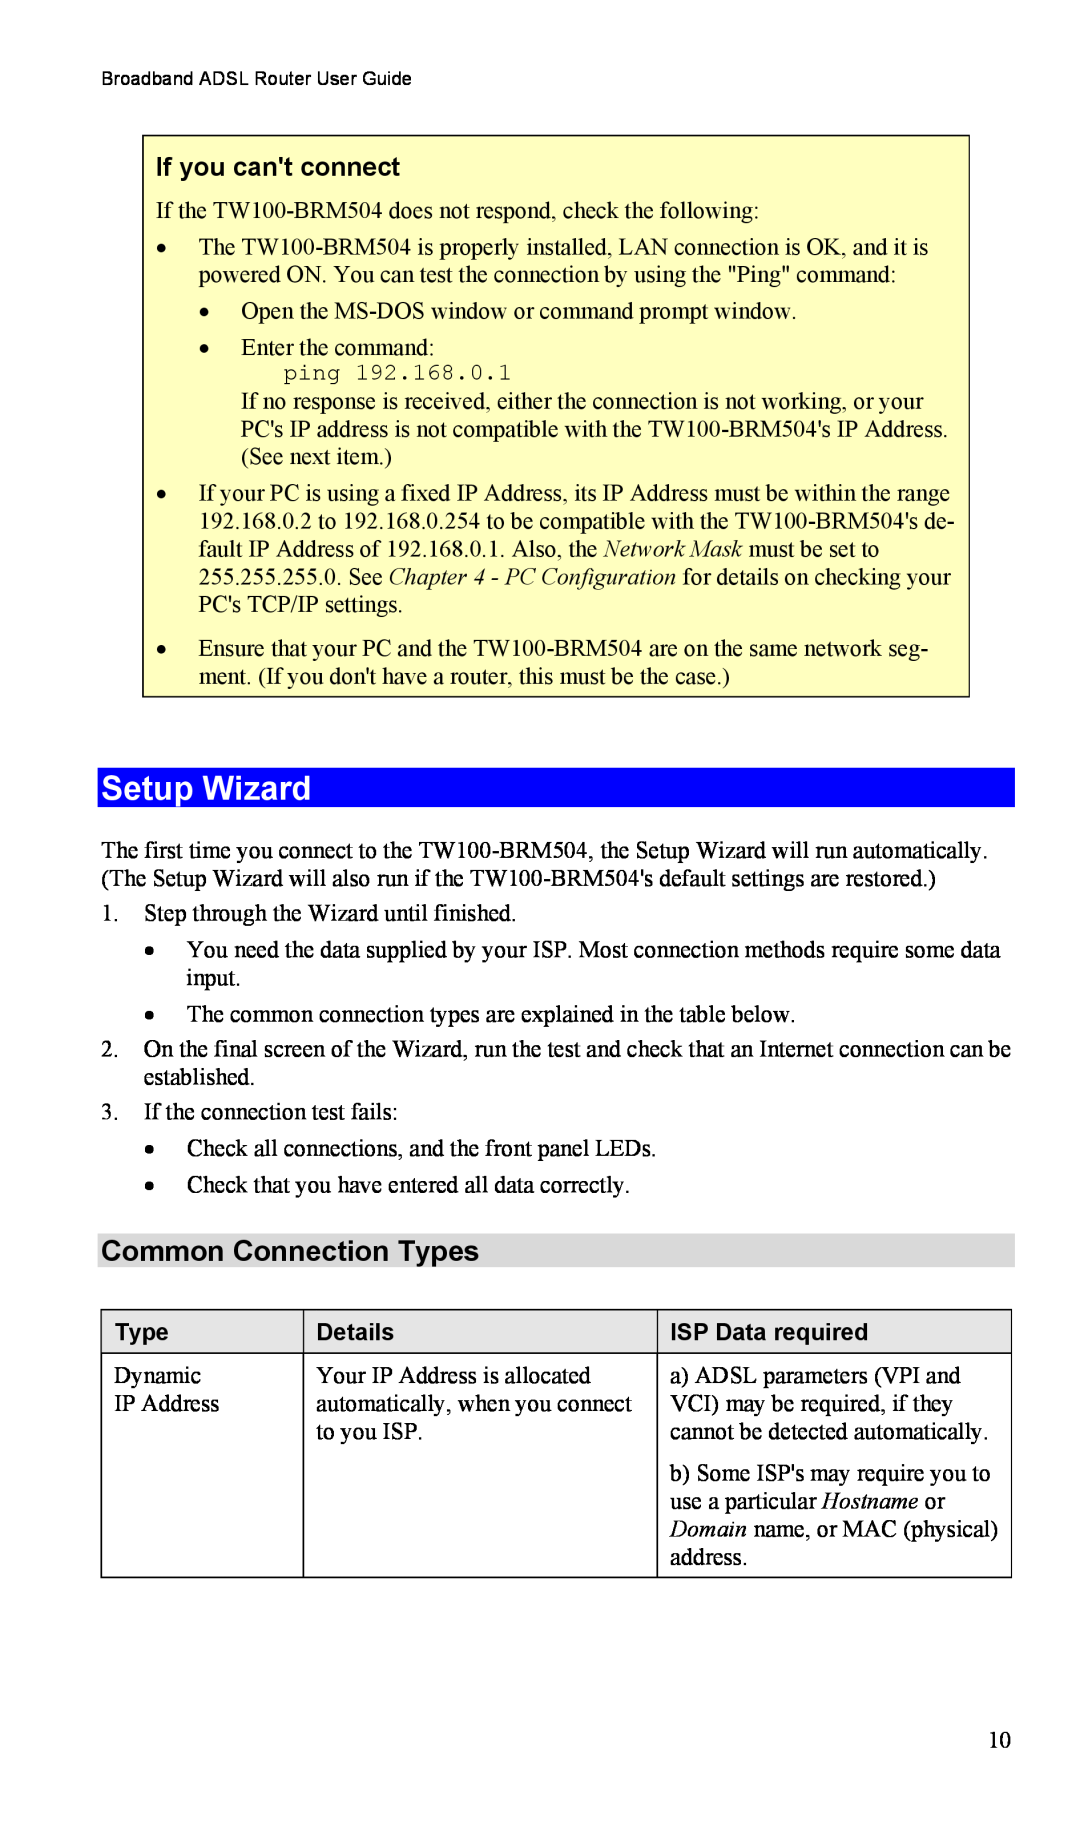 TRENDnet TW100-BRM504 manual Setup Wizard, Common Connection Types, Details, ISP Data required 